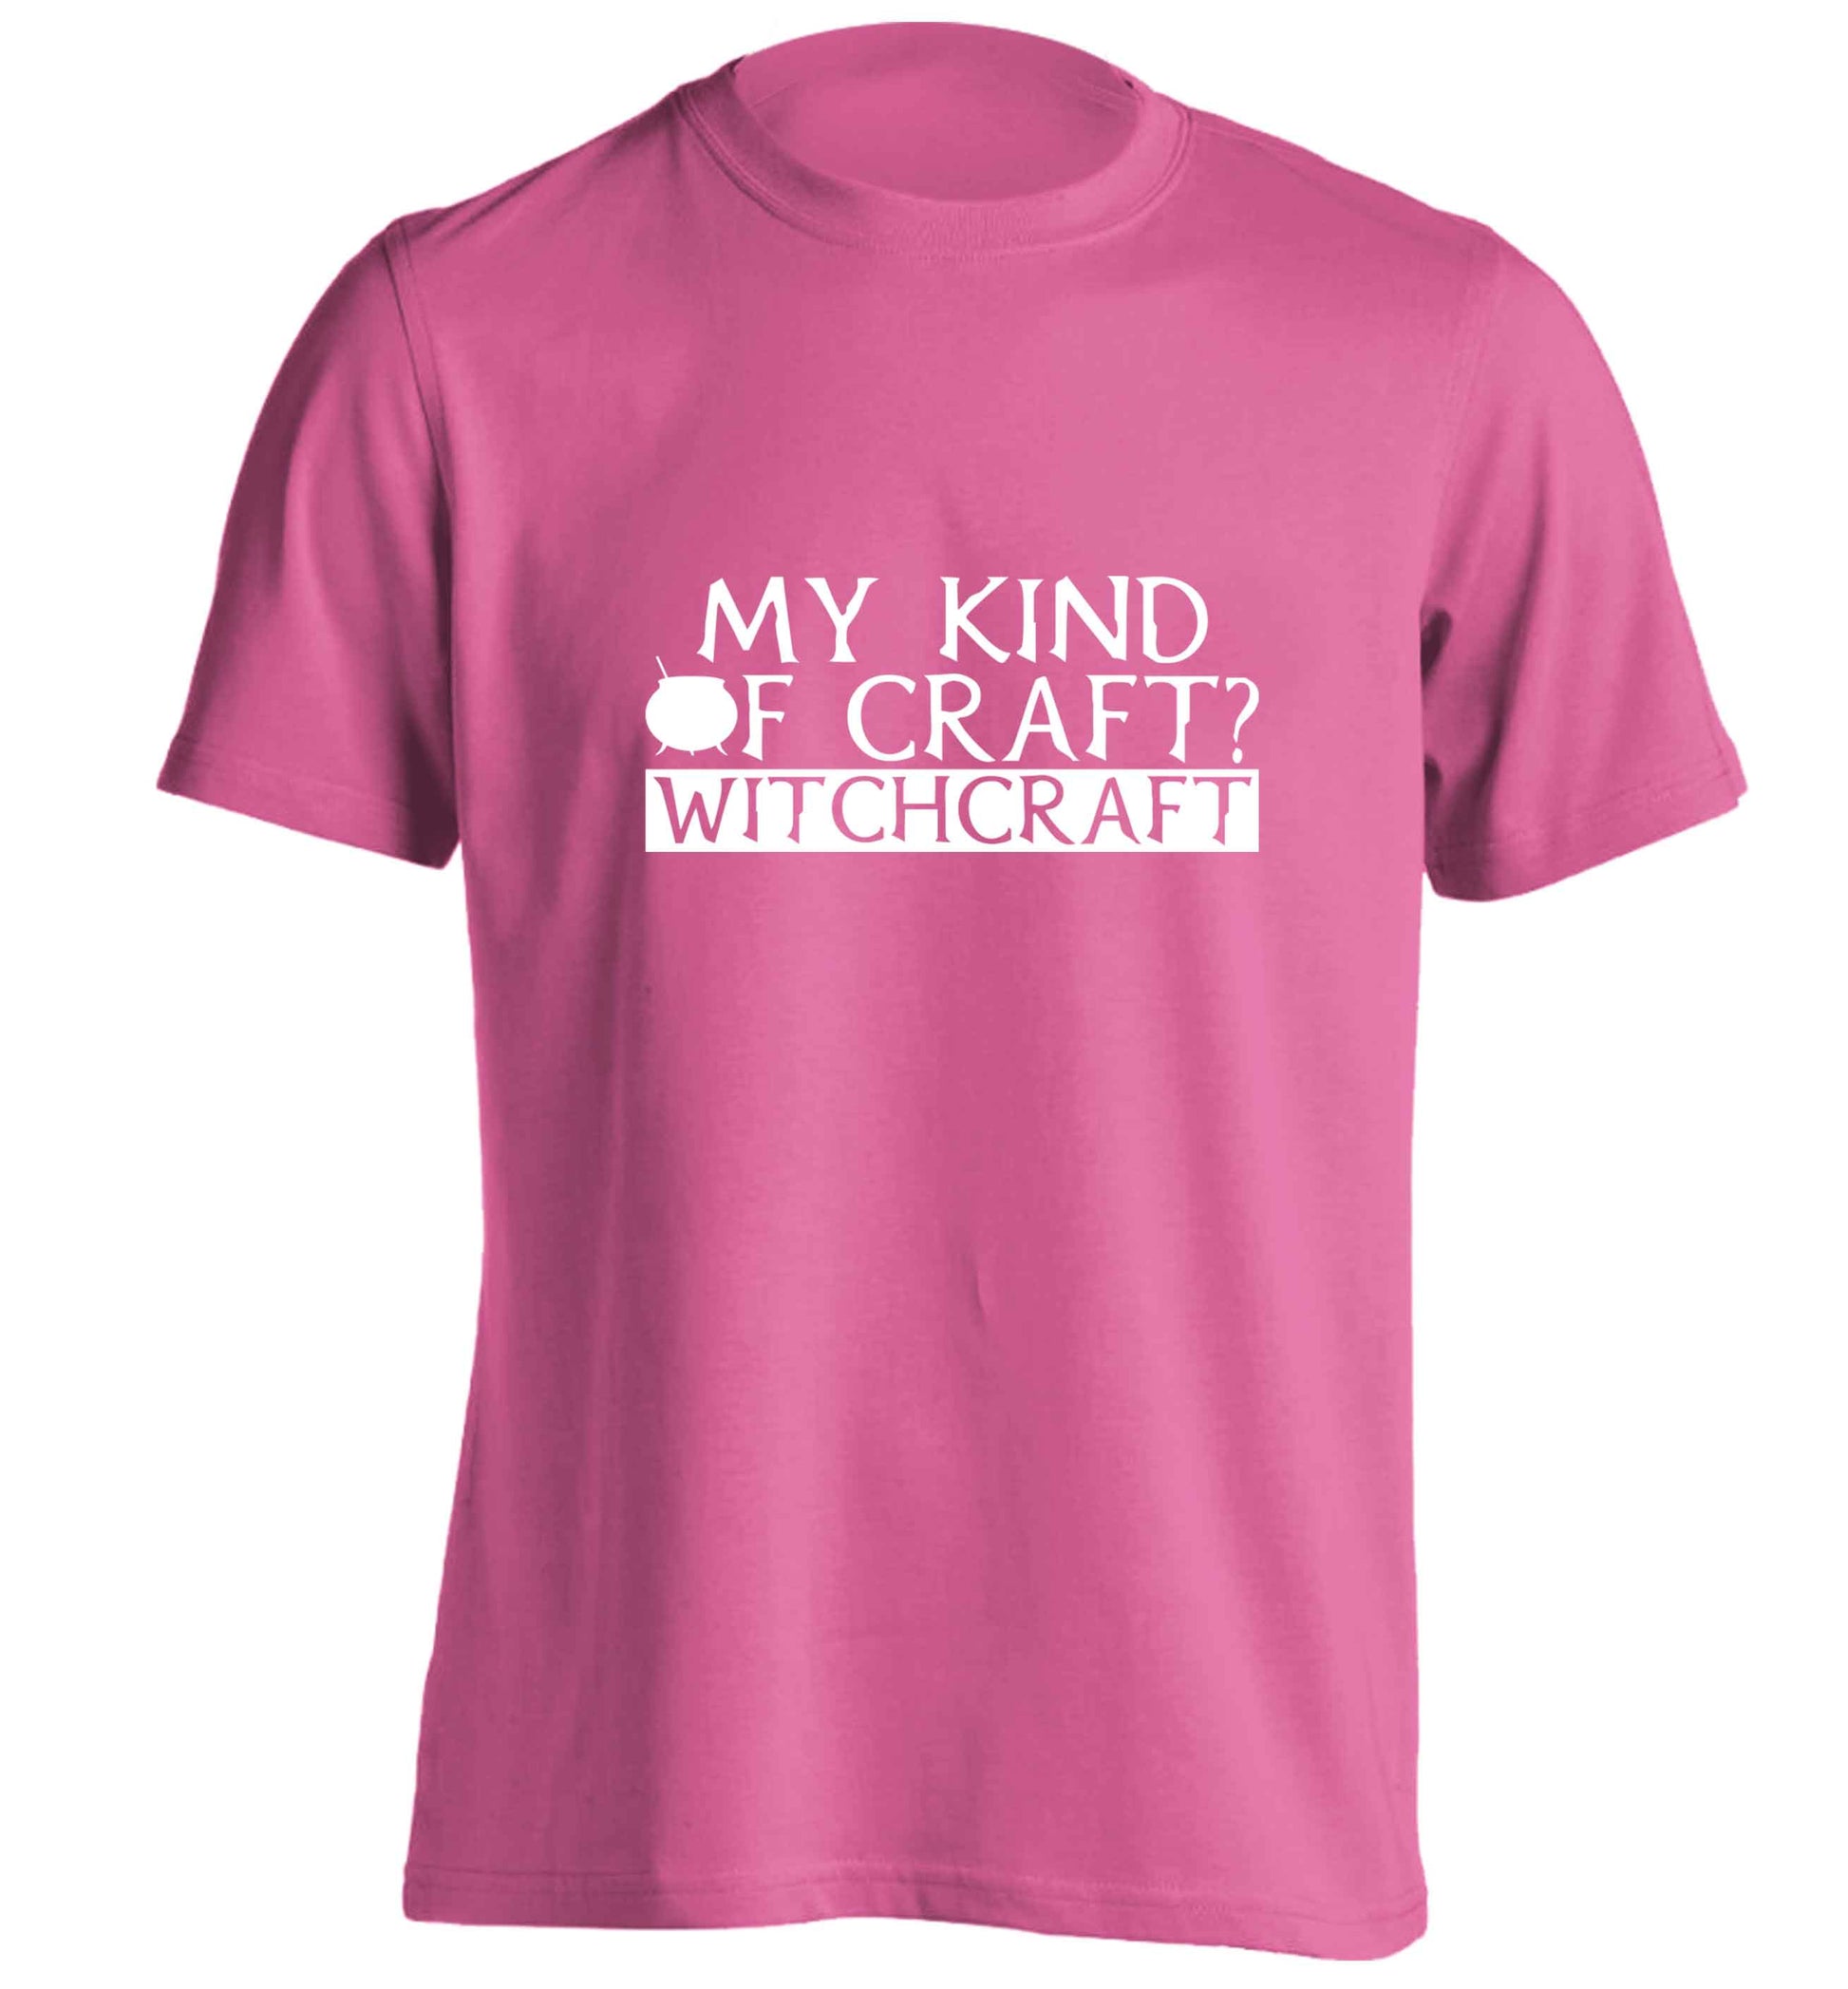 My king of craft? witchcraft  adults unisex pink Tshirt 2XL